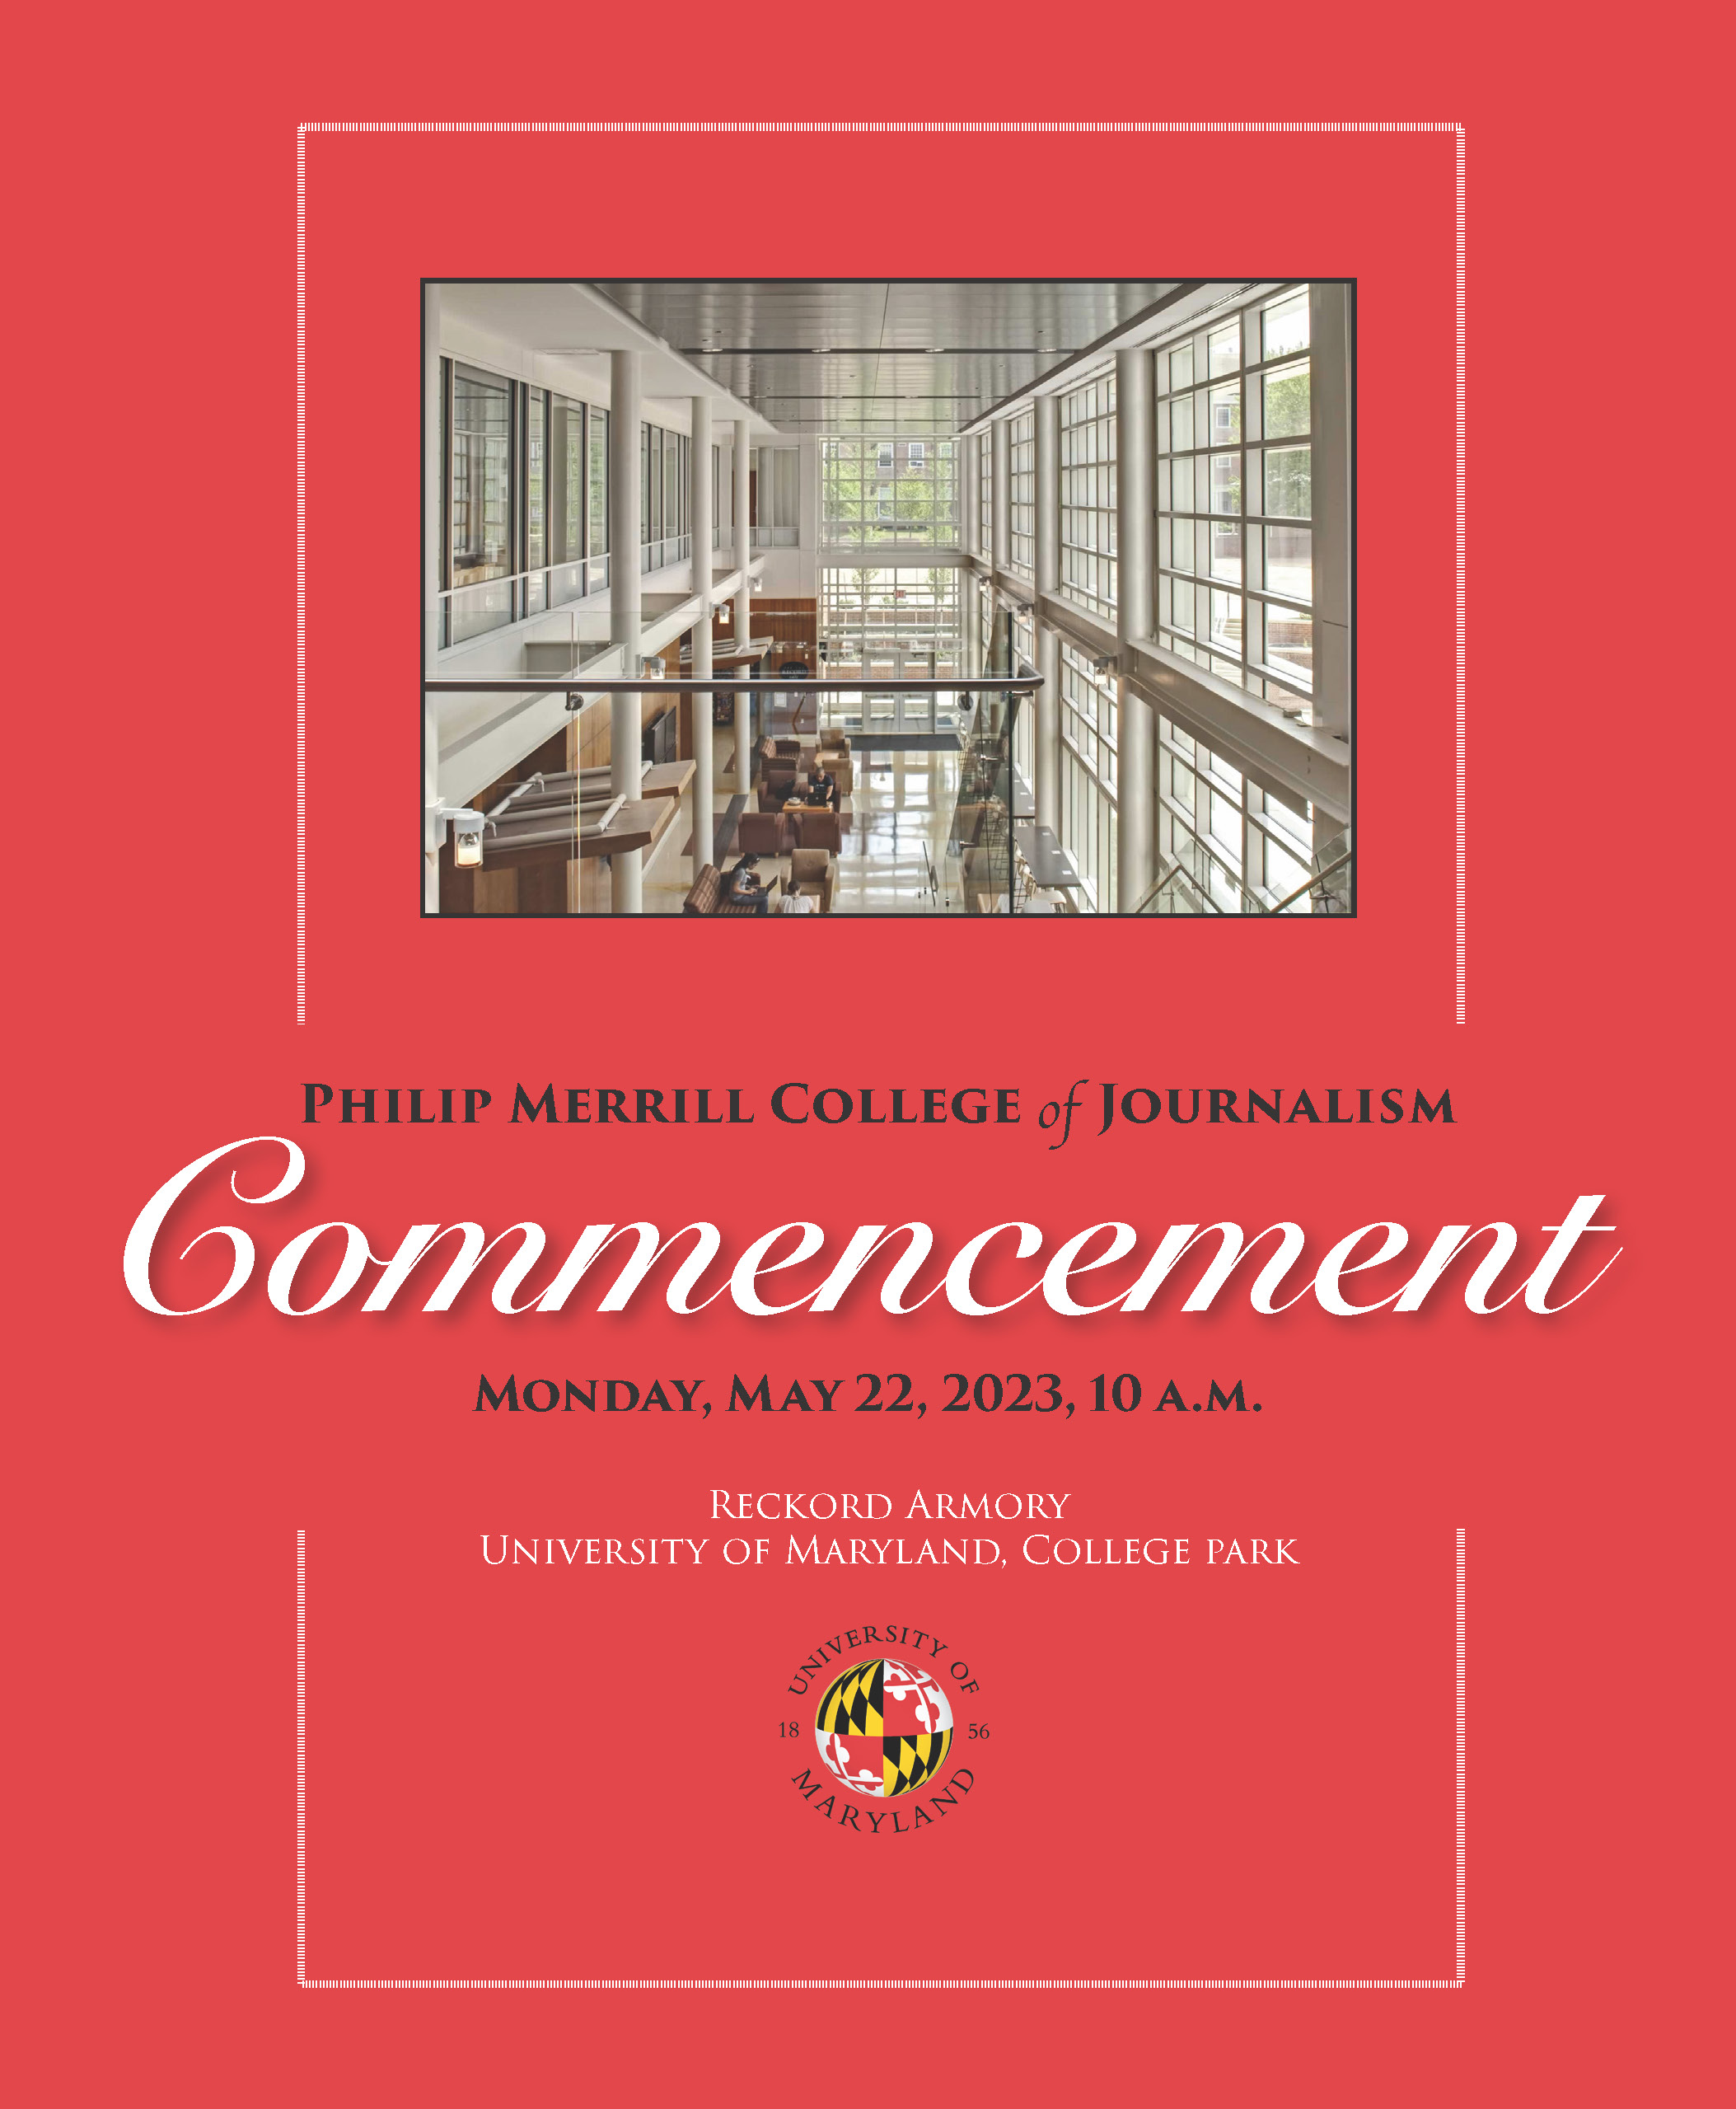 Cover of Merrill College commencement program